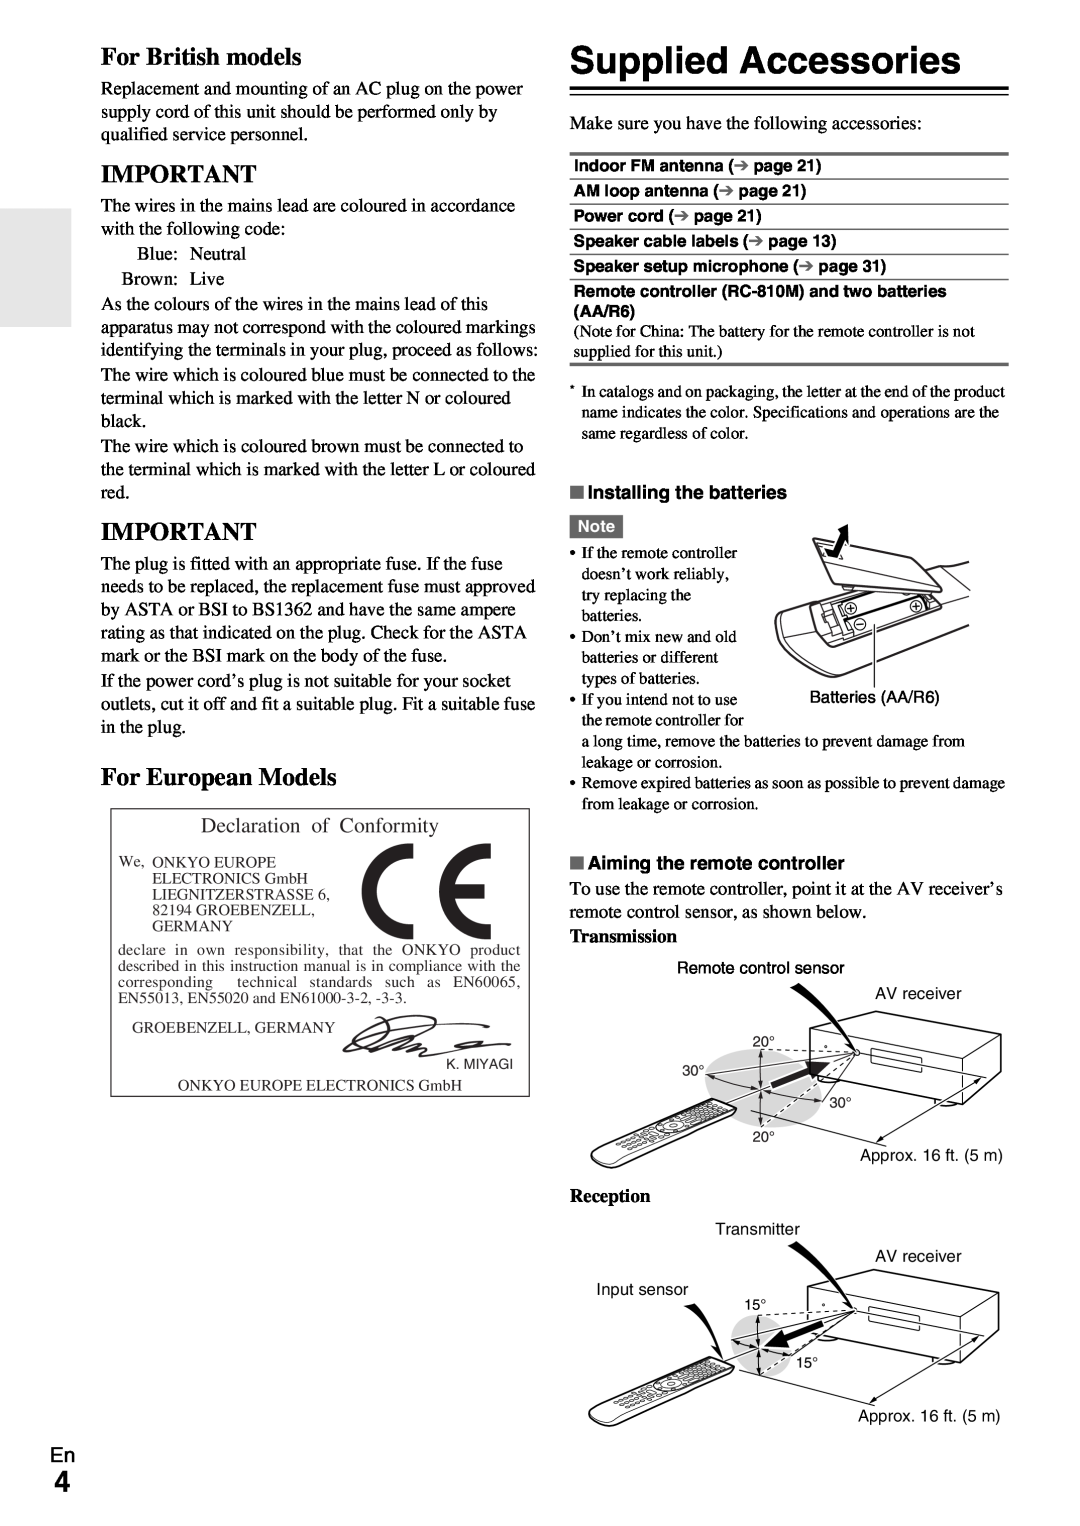 Onkyo TX-NR1009 instruction manual Supplied Accessories, For British models, For European Models, Declaration of Conformity 